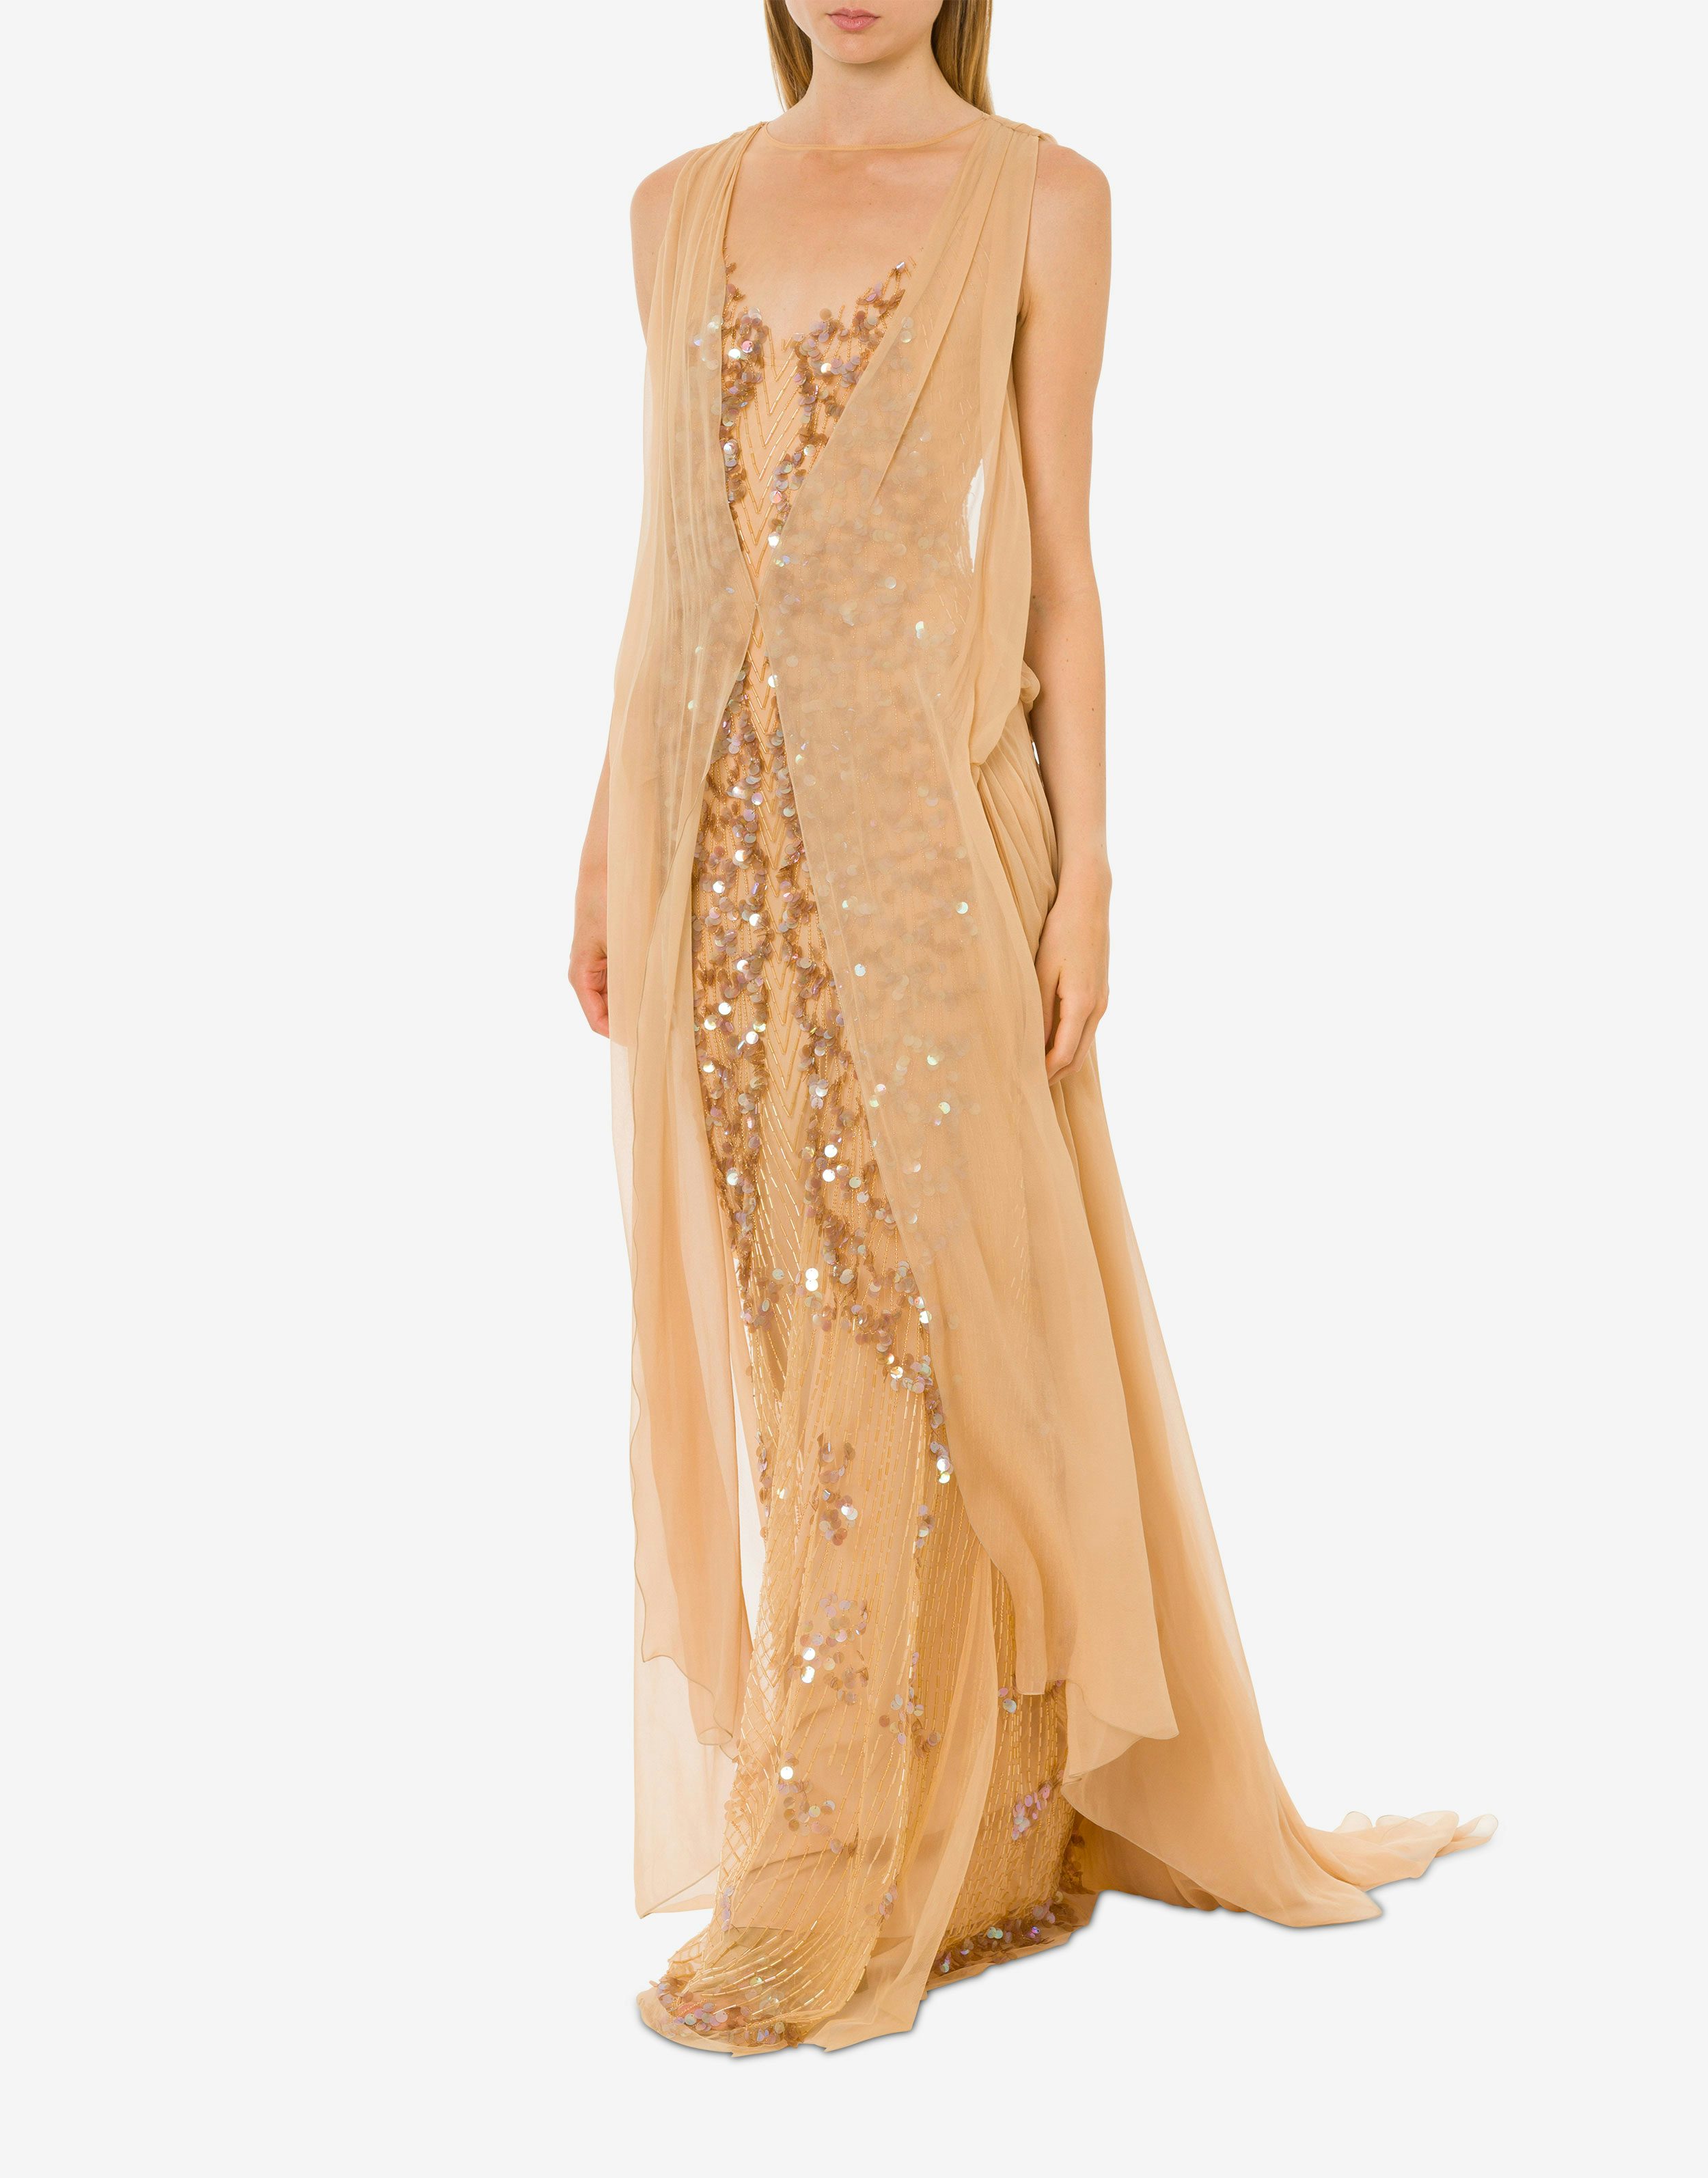 Long dress in sequins and organic chiffon.